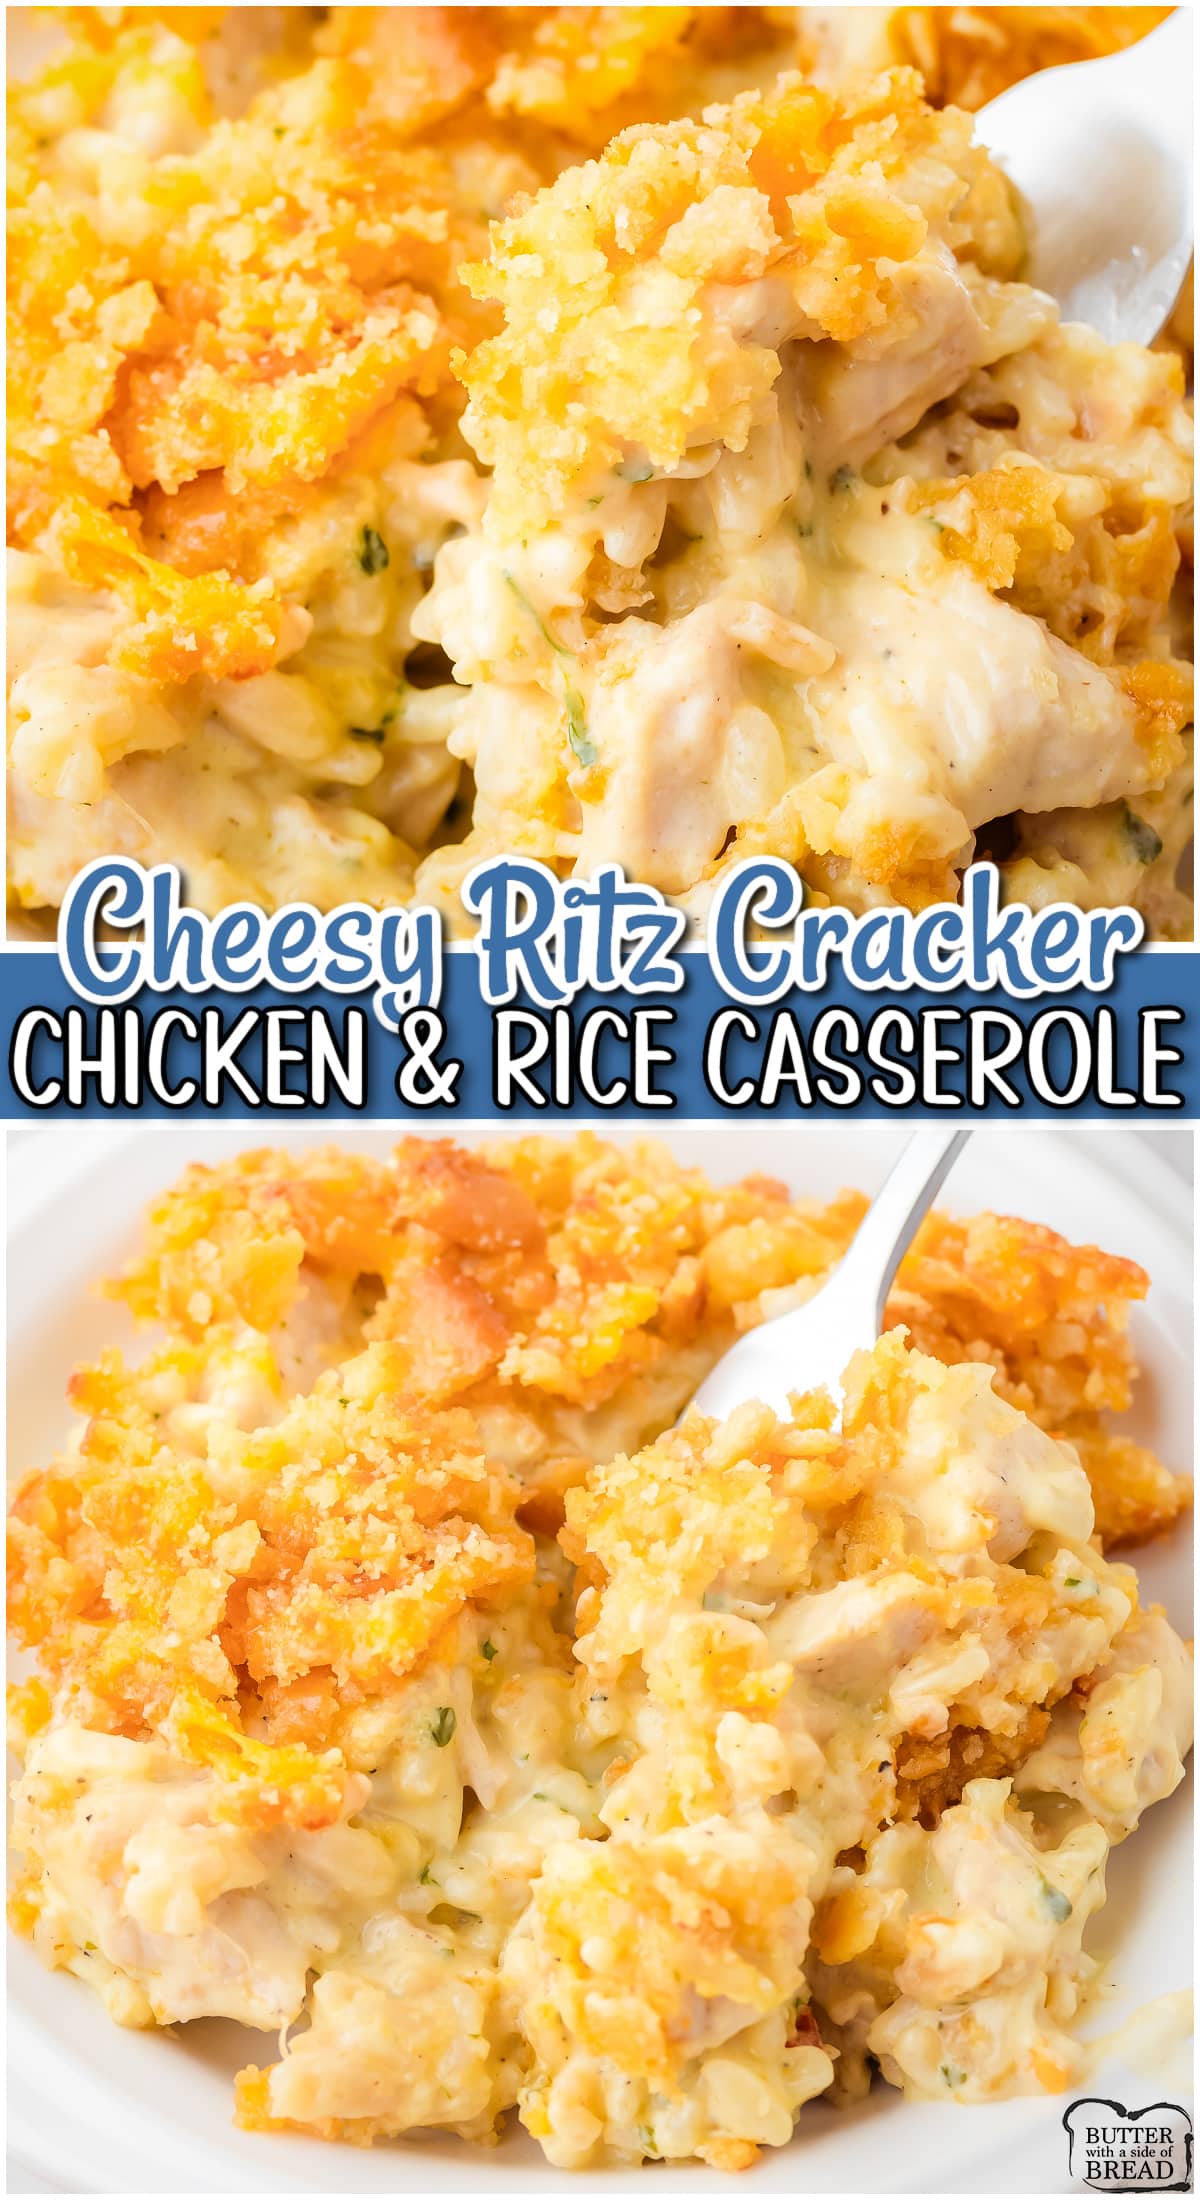 Delicious Ritz Cracker Chicken and Rice Casserole made with simple pantry ingredients for a classic, comforting dish! Creamy, flavorful chicken casserole topped with toasted buttery crackers everyone loves! 